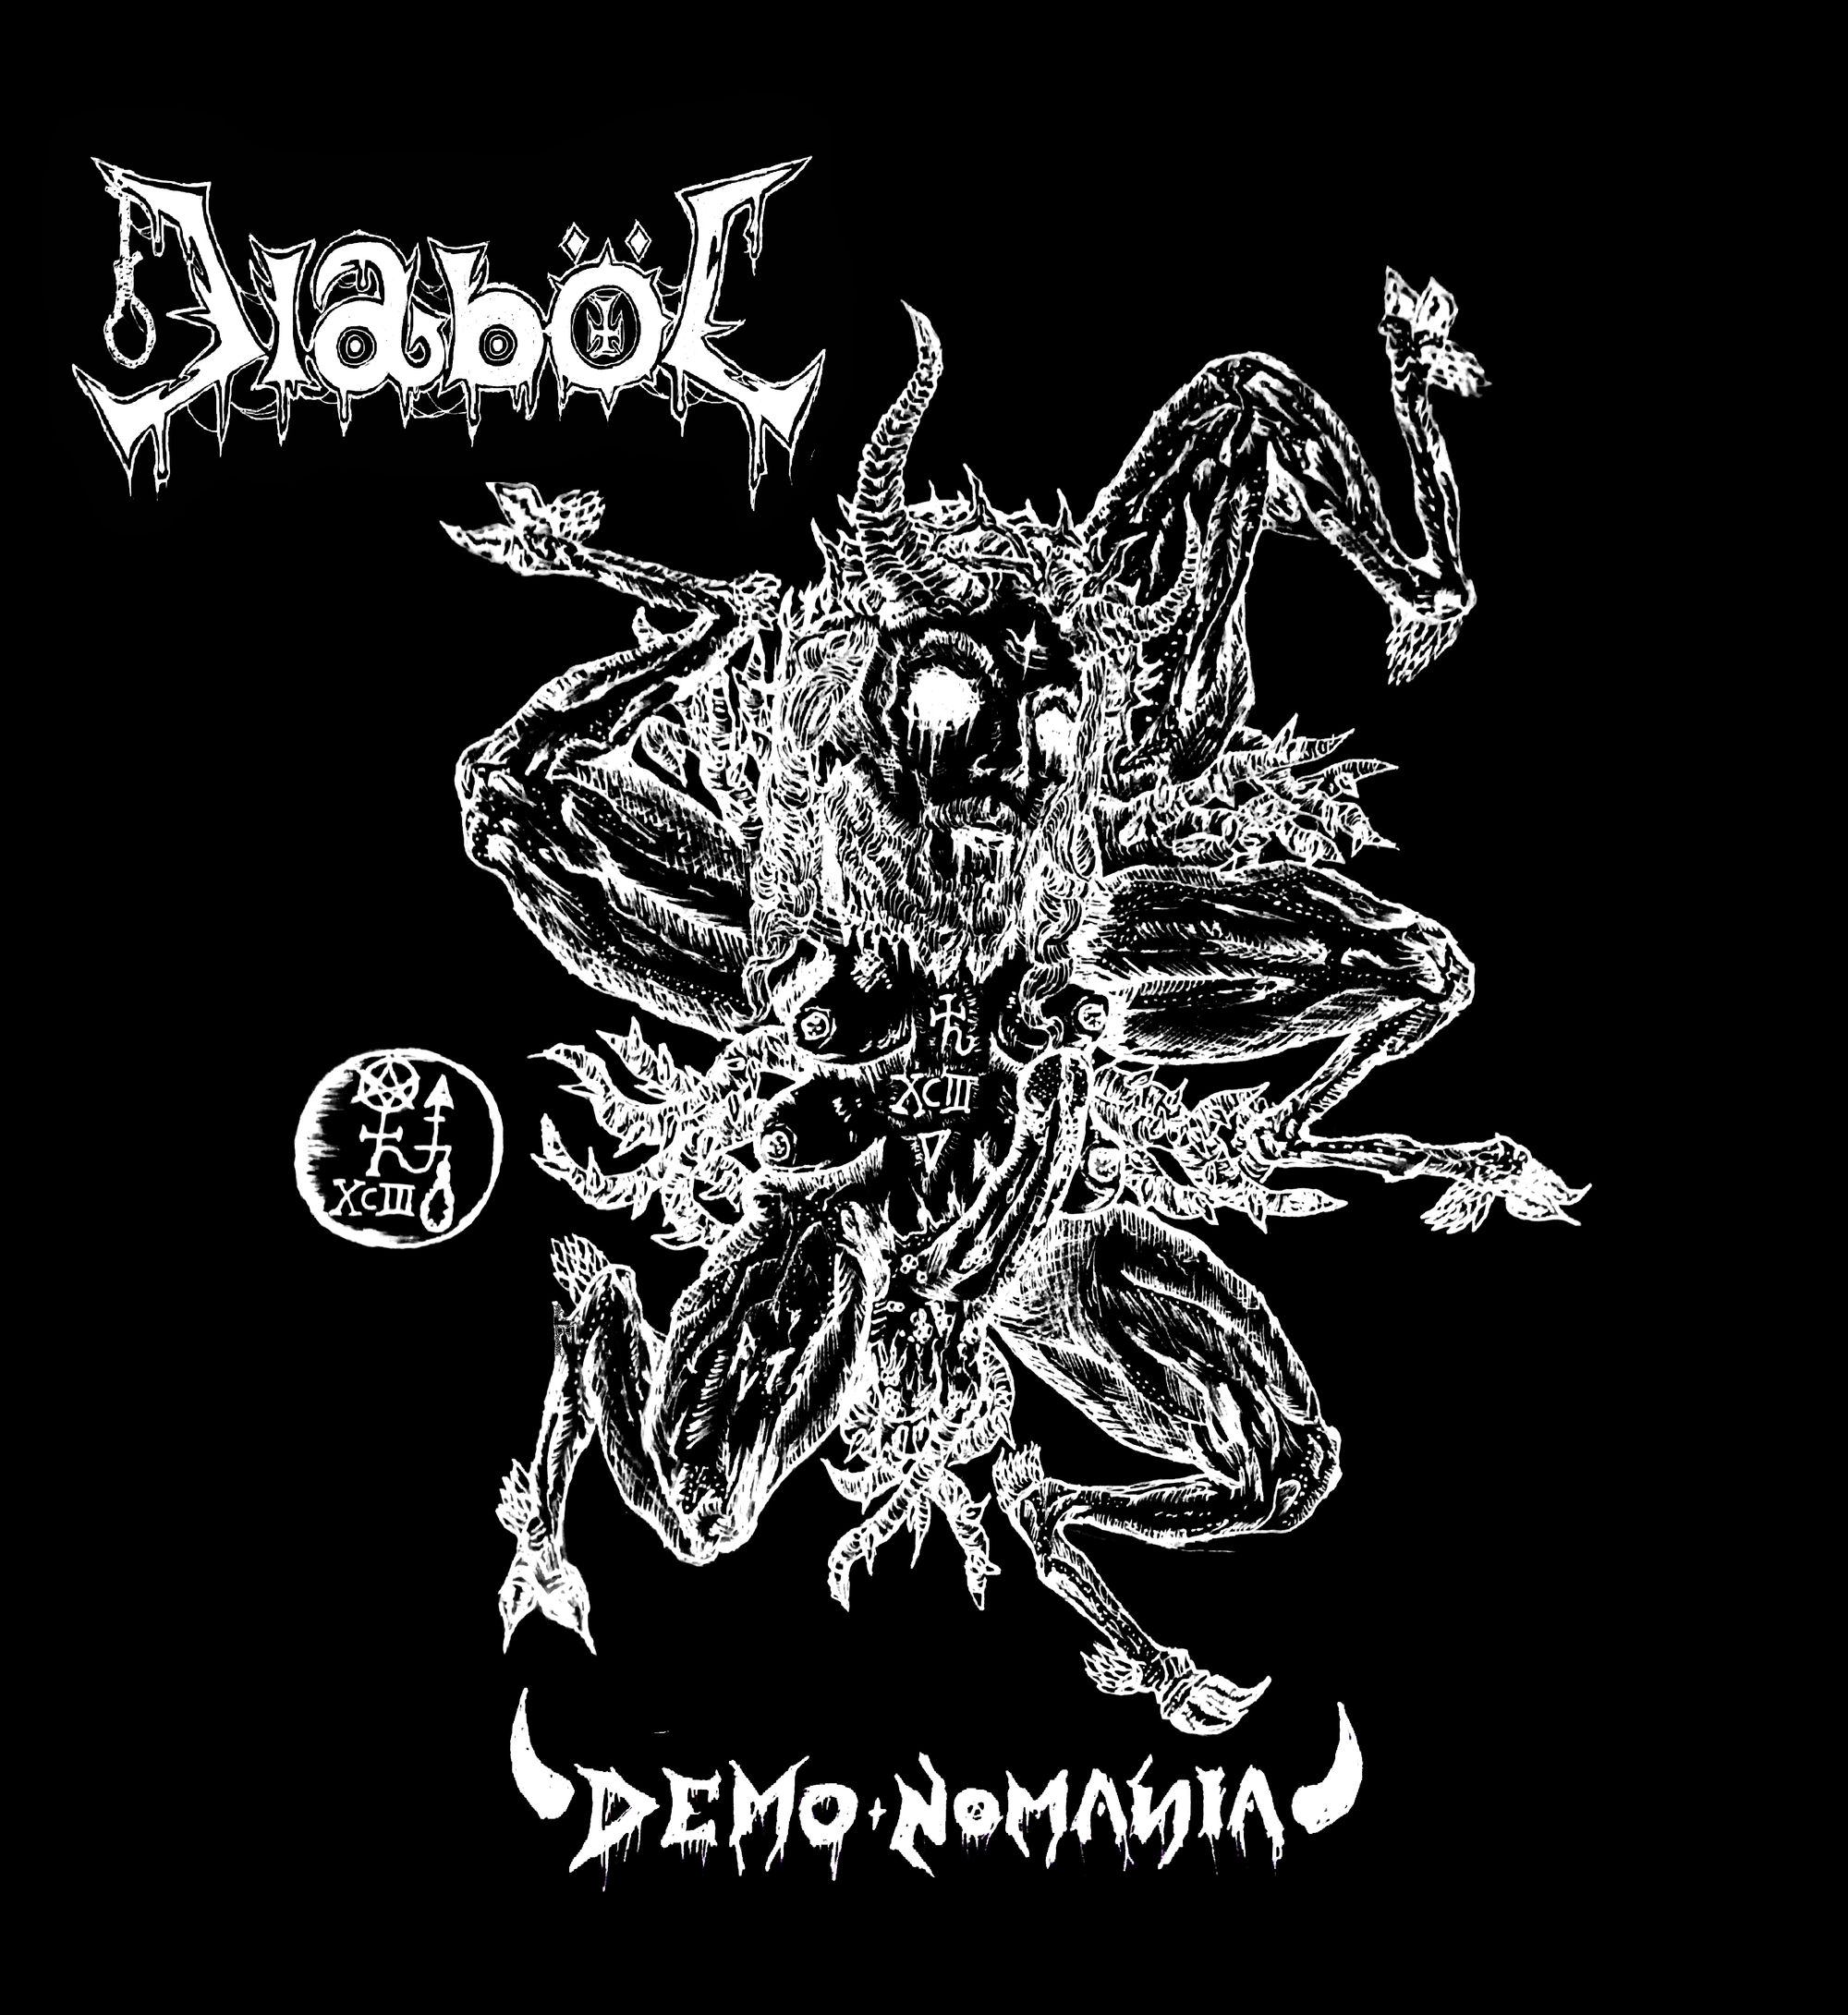 Interview with DIABOL